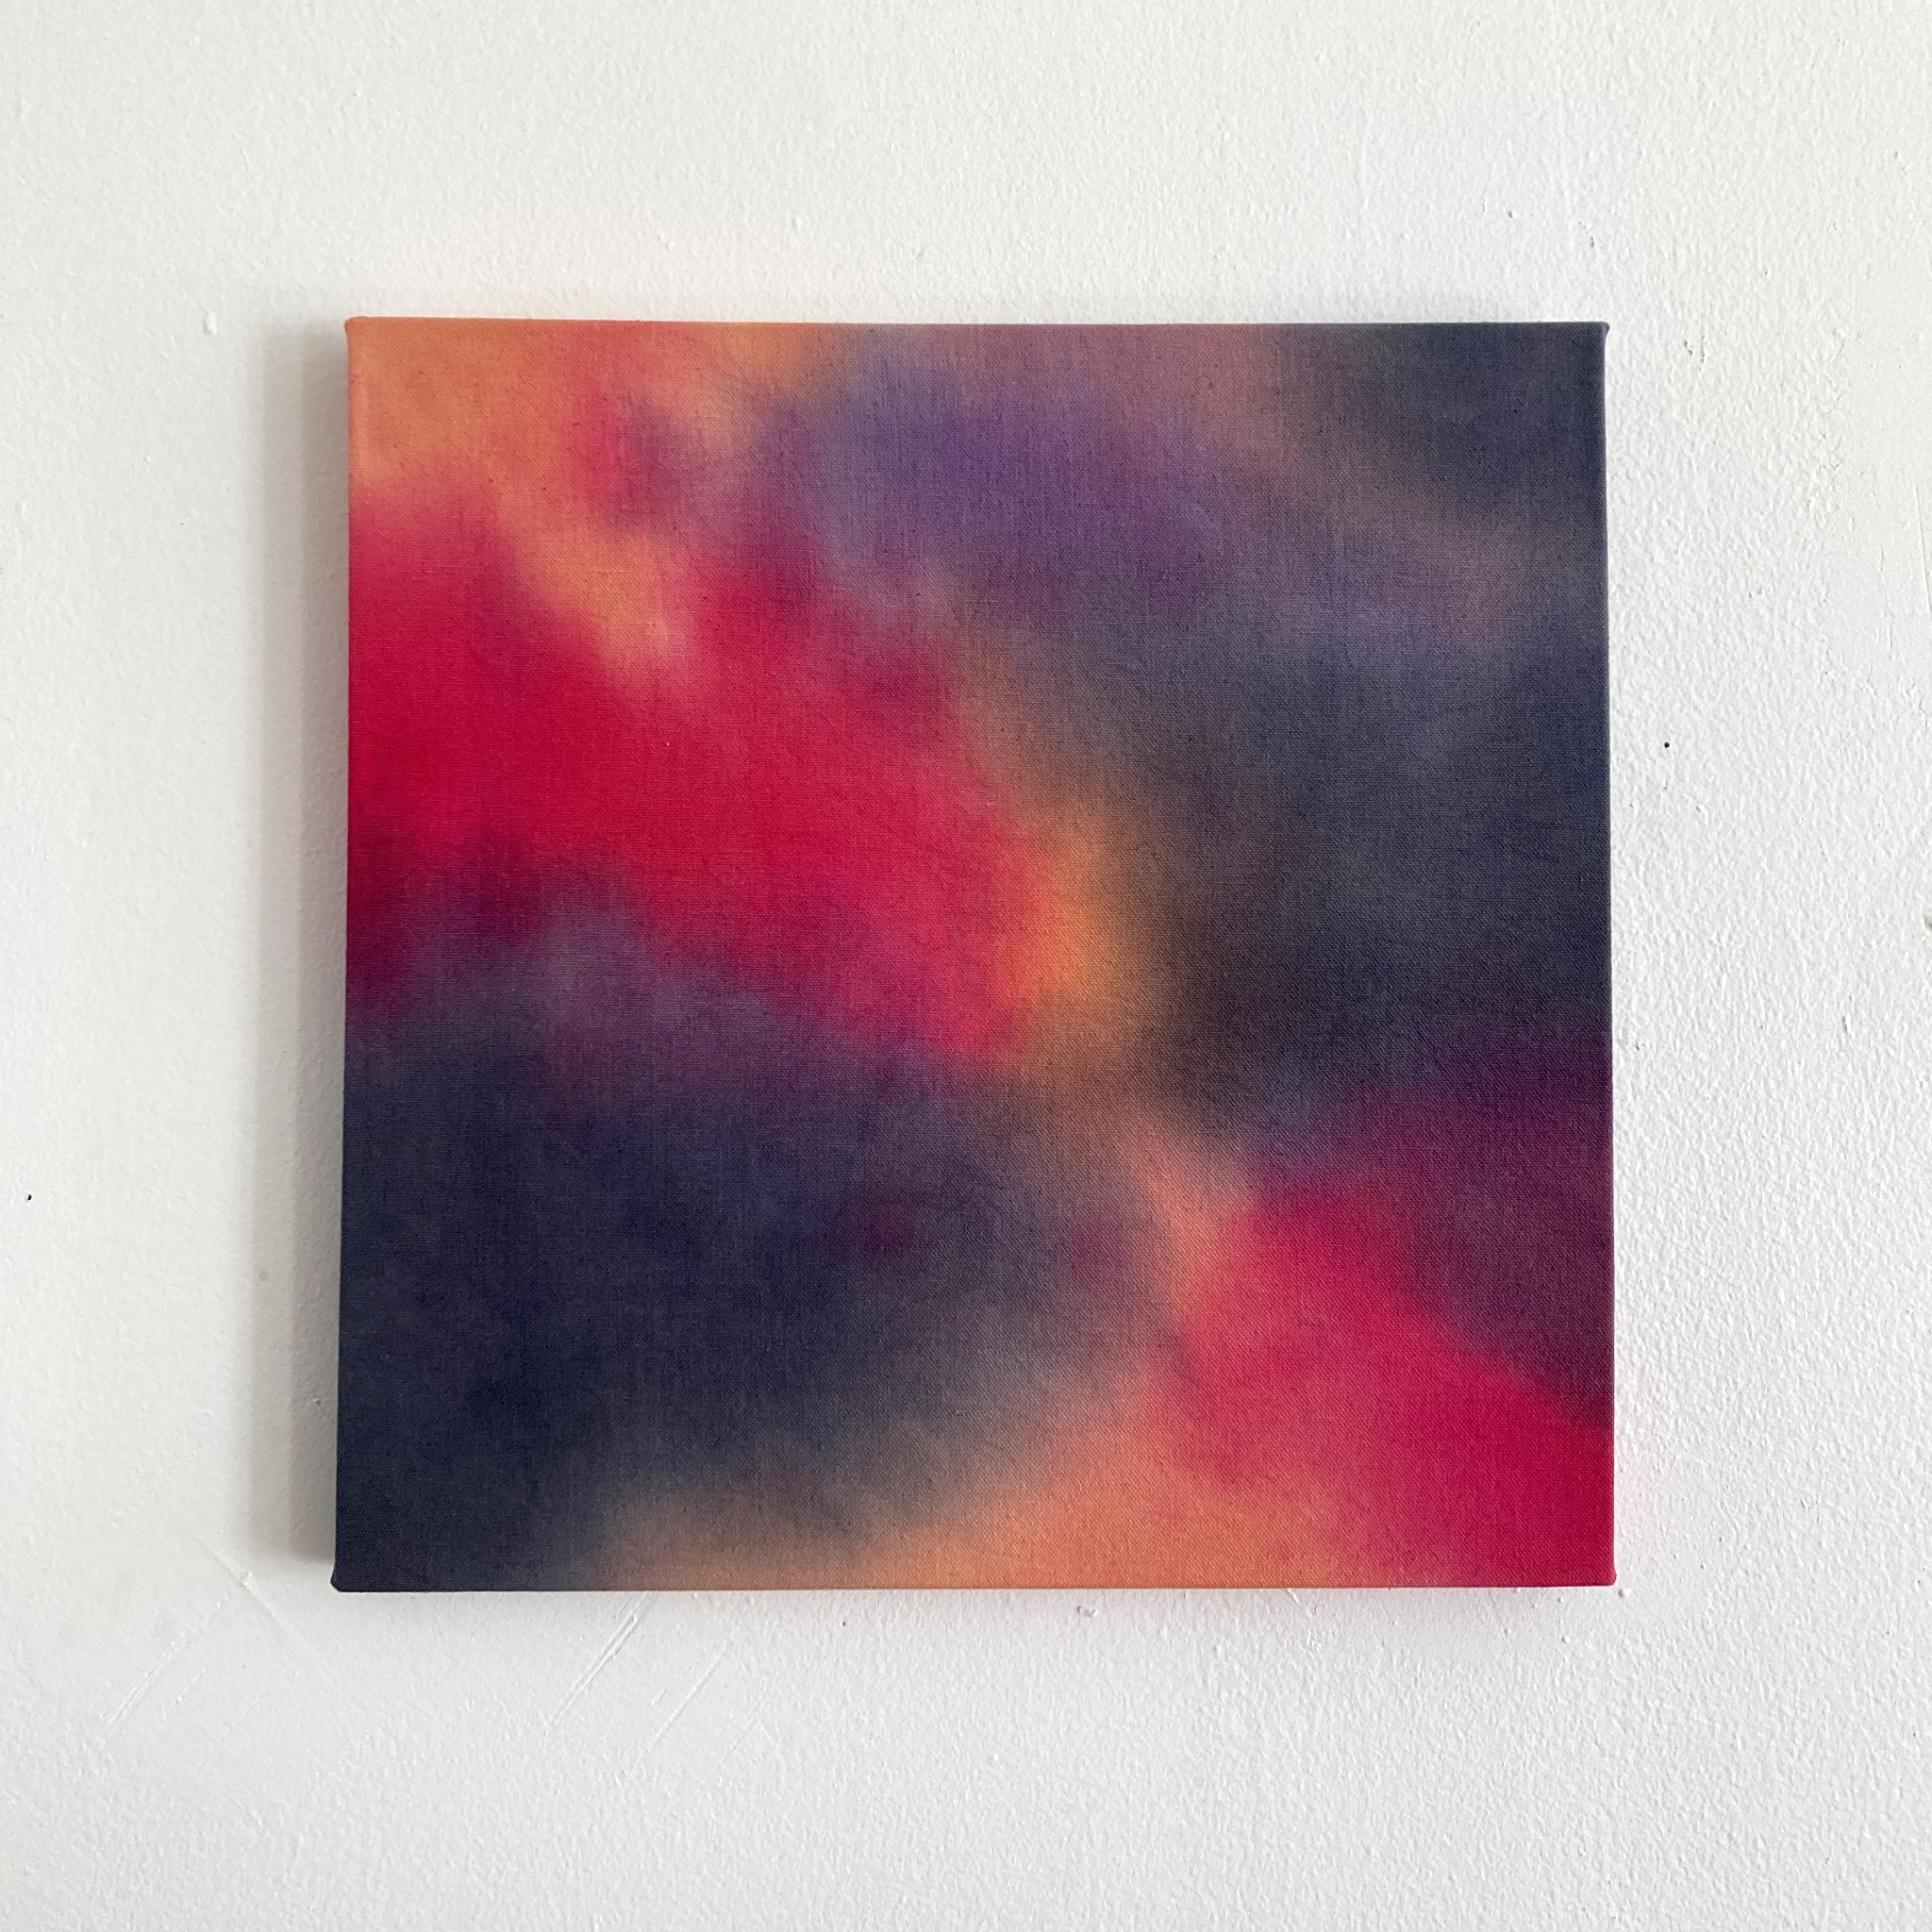 An ethereal abstract painting, created in our NYC studio. This 16 x 16 inch canvas is a place for the eye to wander. Magenta, peach, slate and lilac create a calming yet vibrant piece.

This series of paintings is an extension of my exploration of